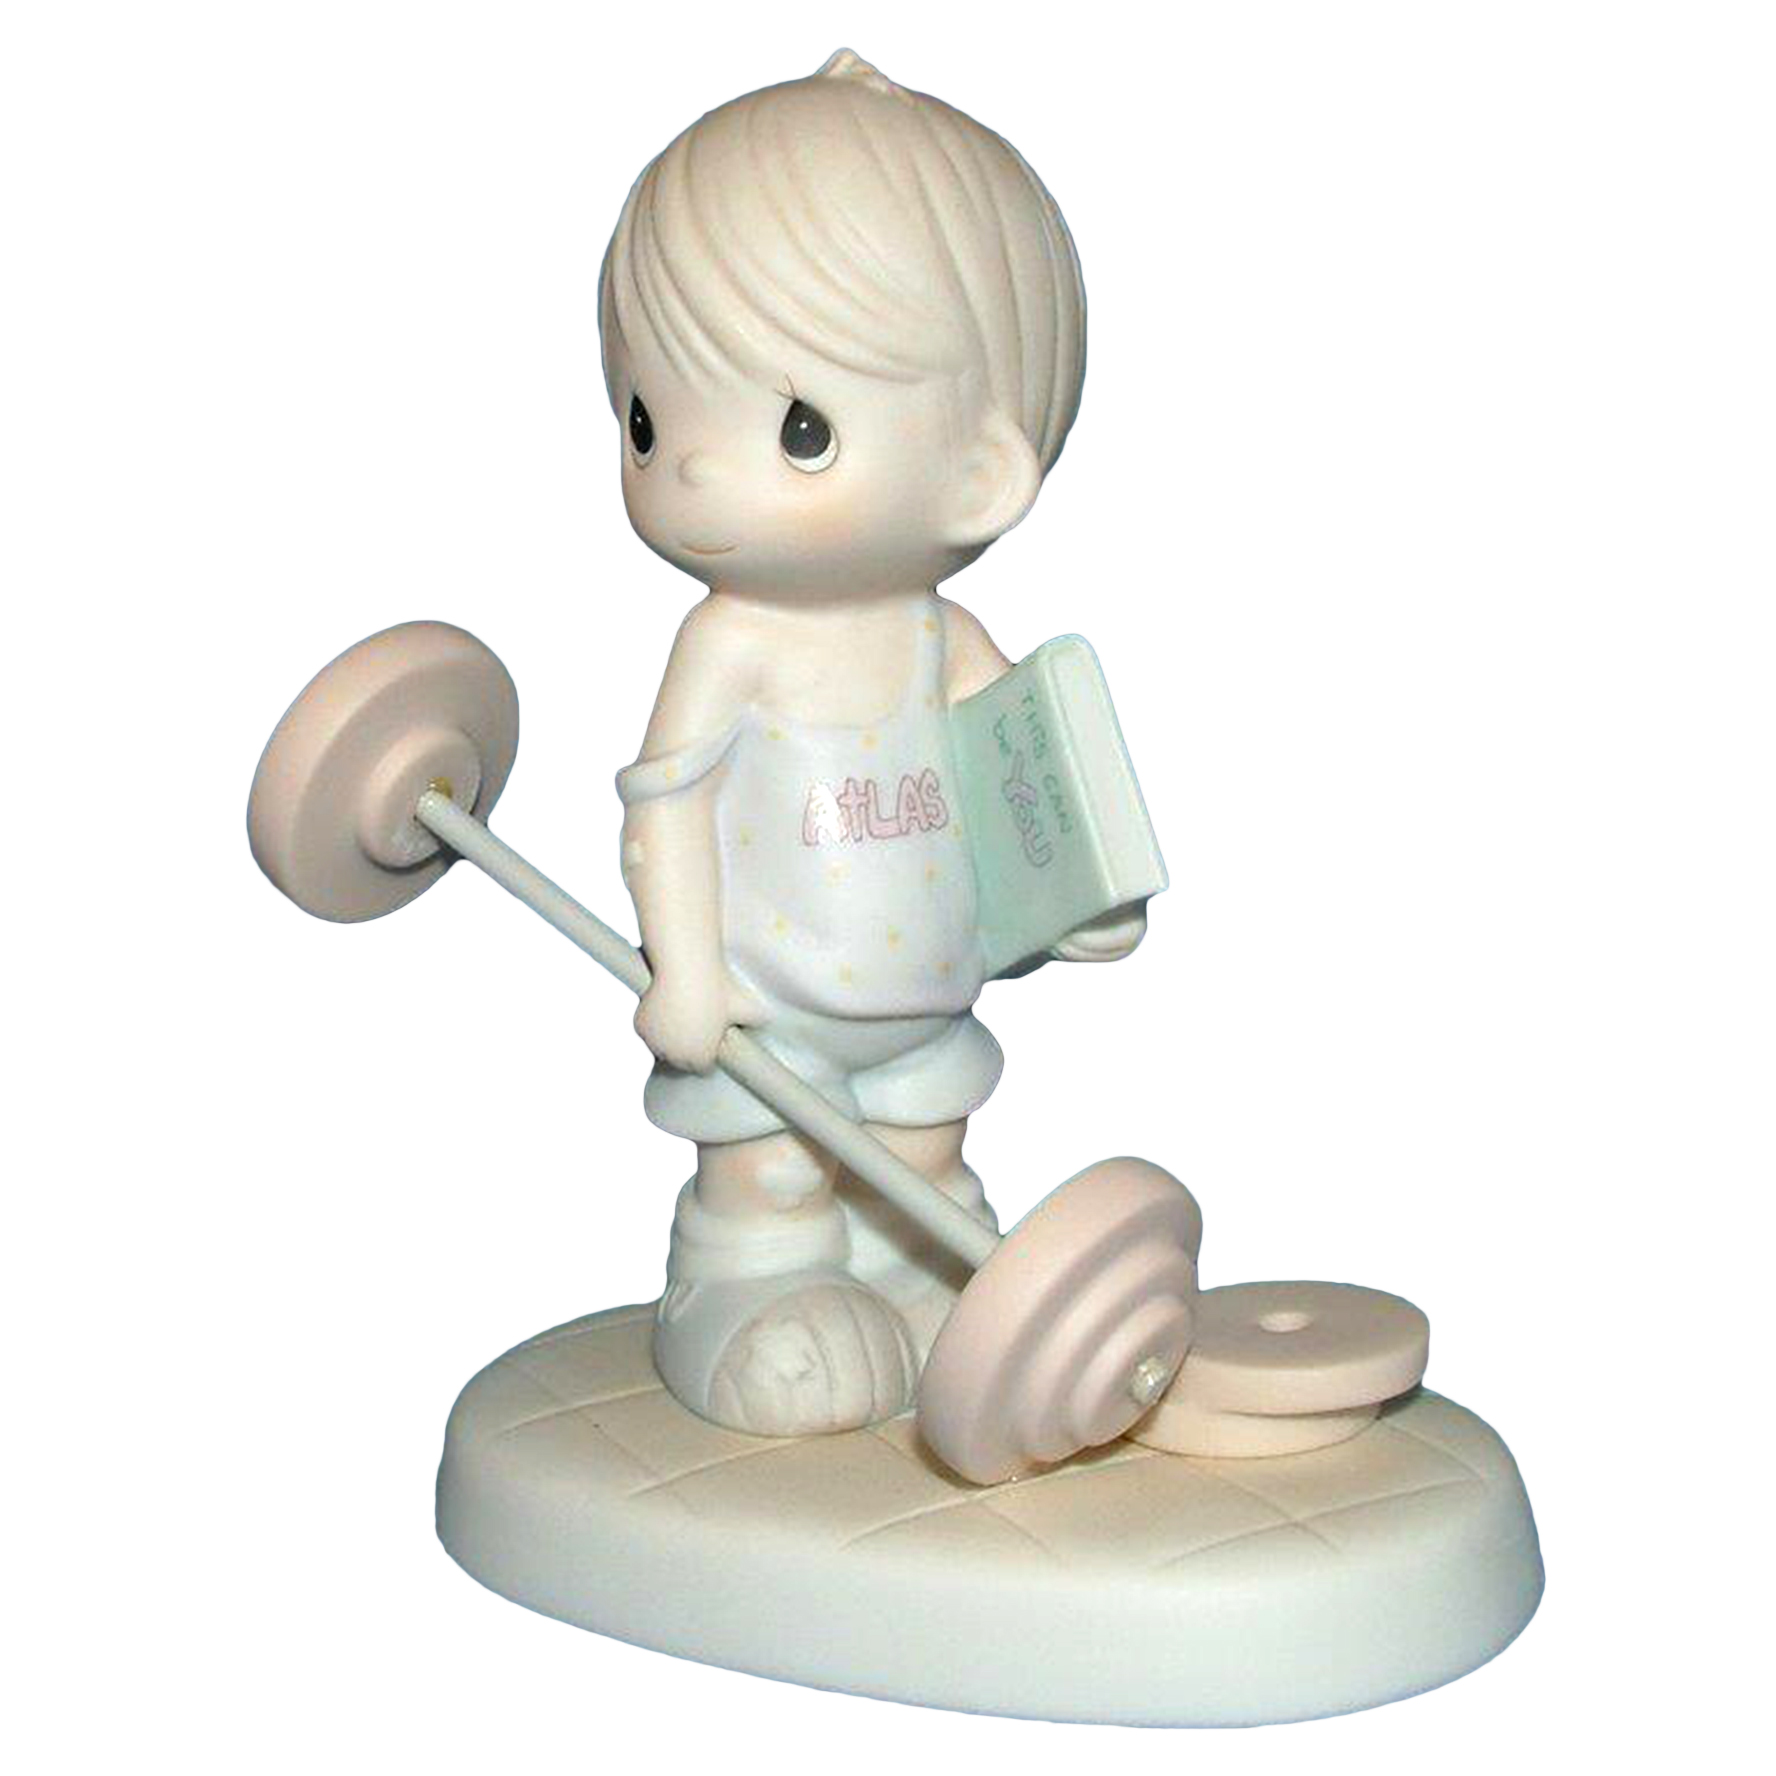 Precious Moments Figurine: 109487 Believe the Impossible (5.5") - image 1 of 3